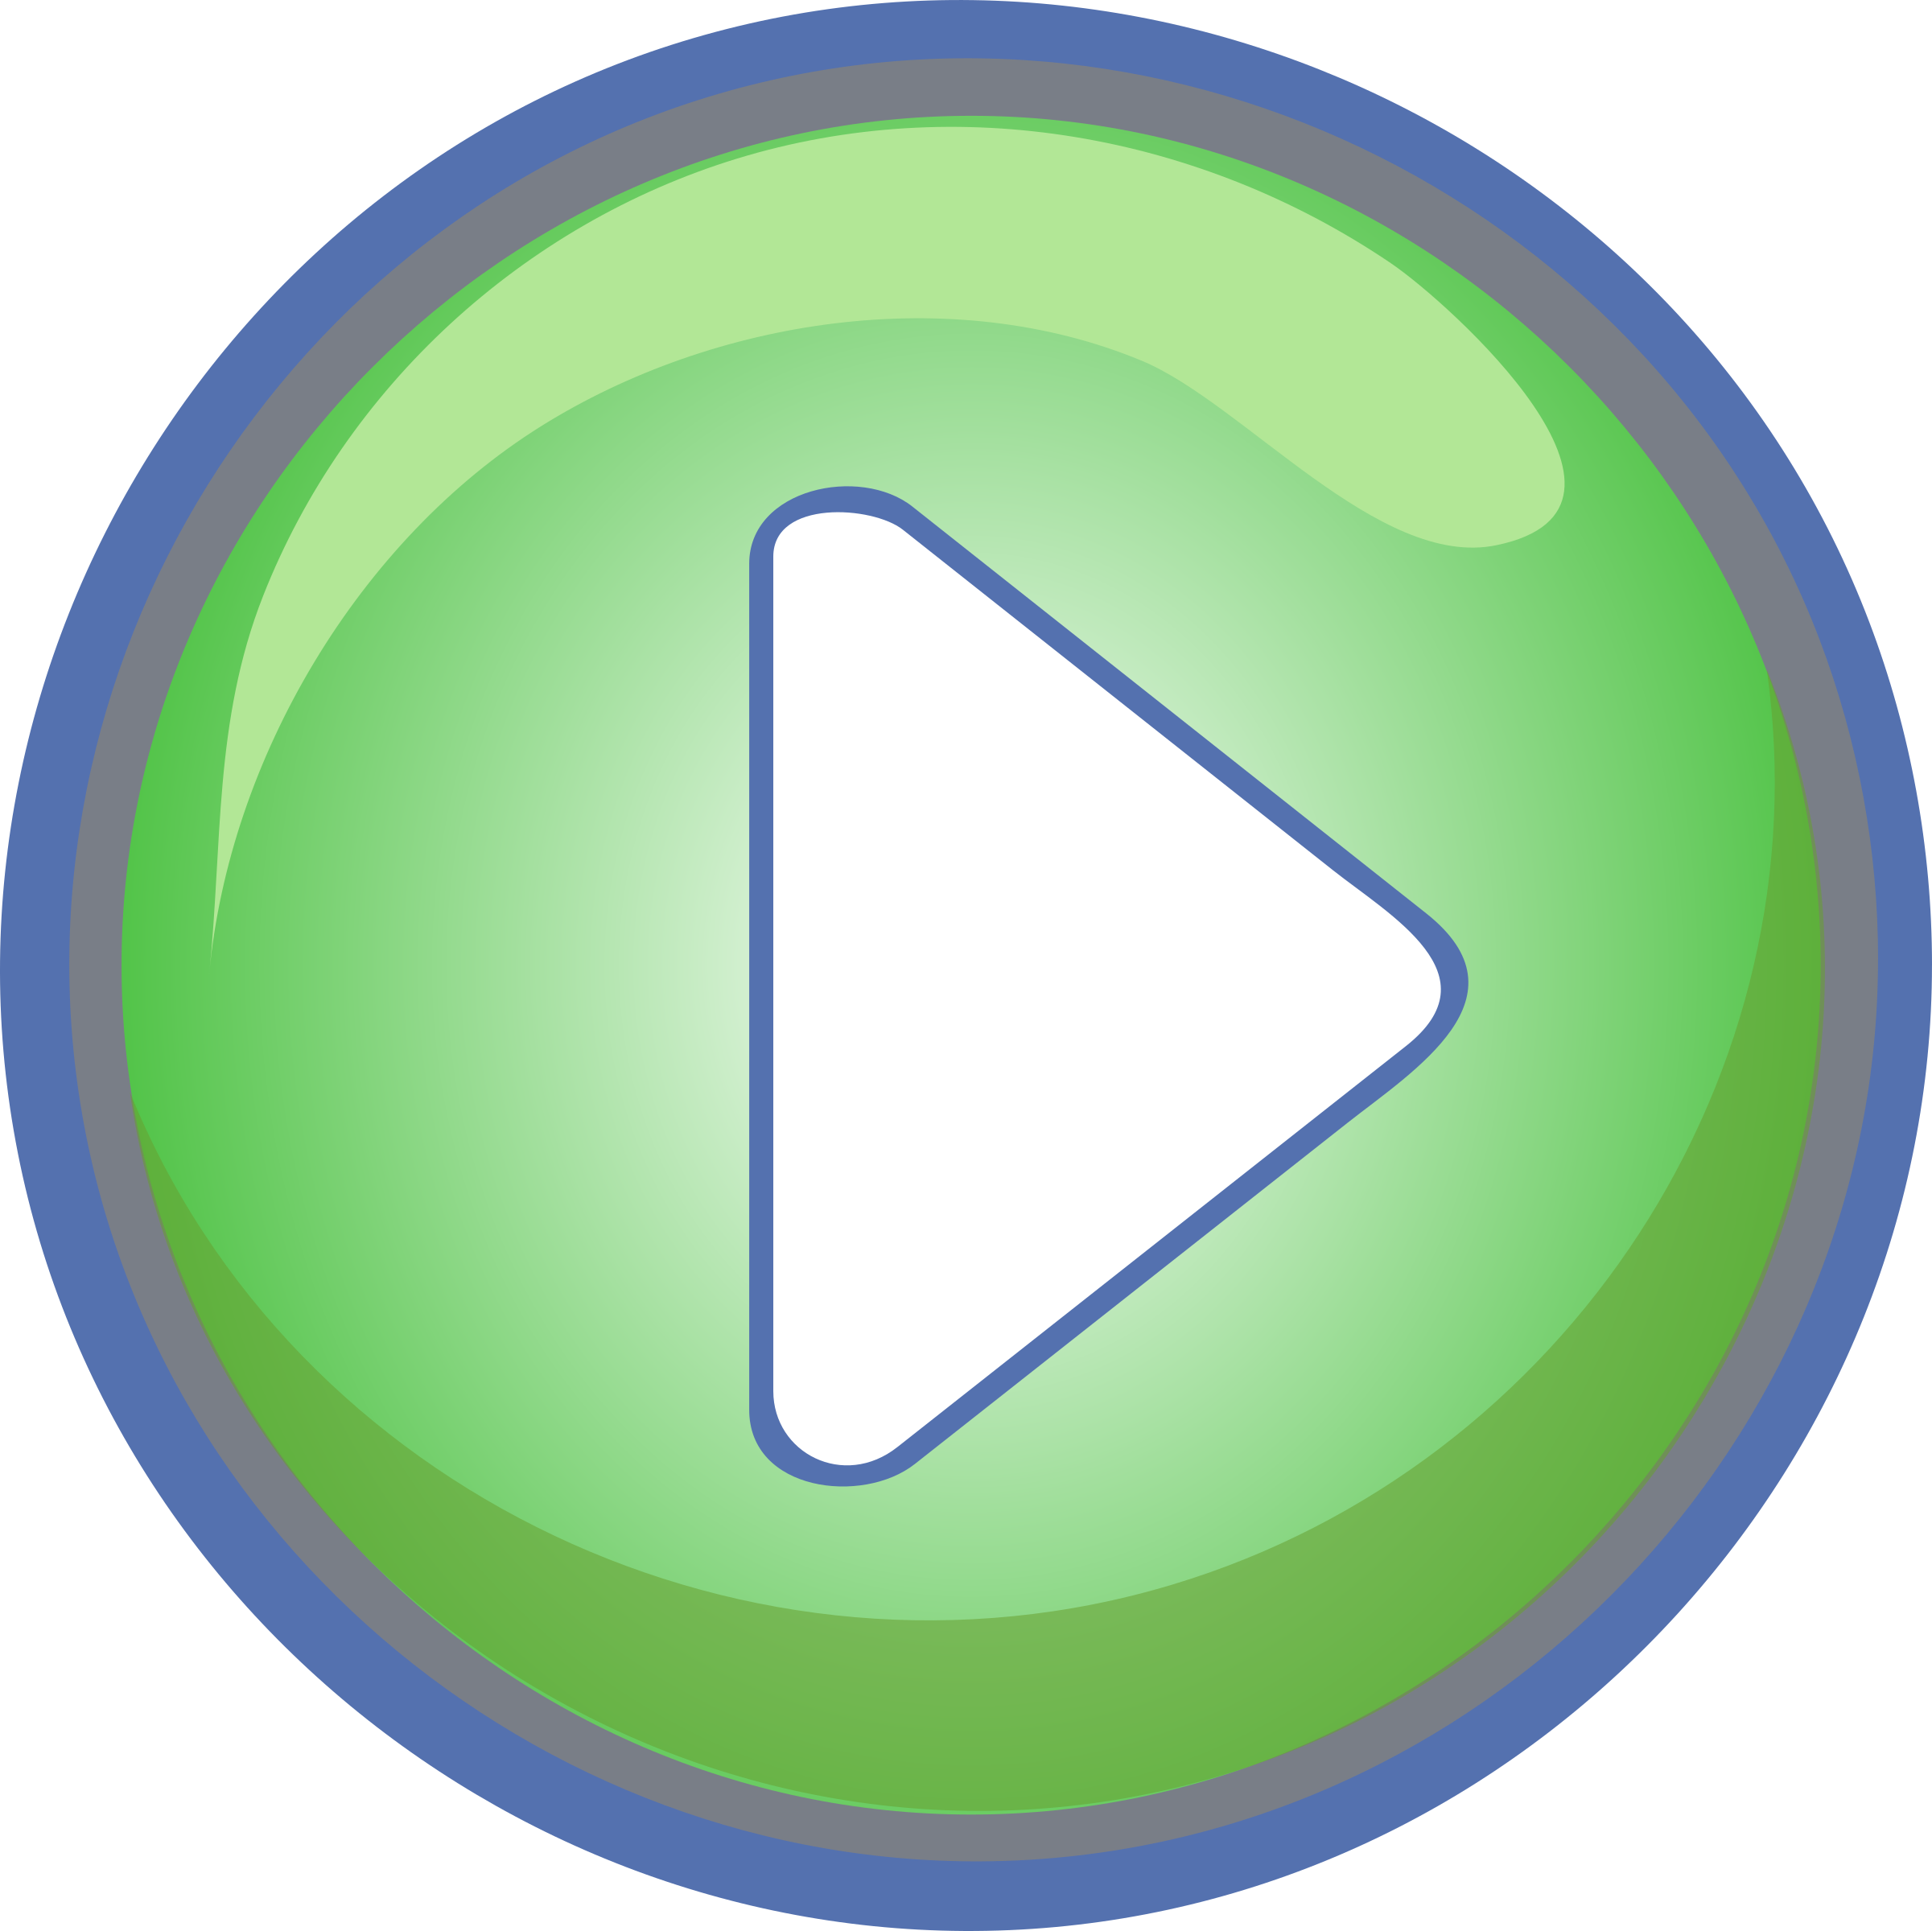 Play Button Green with Blue Border SVG Clip arts